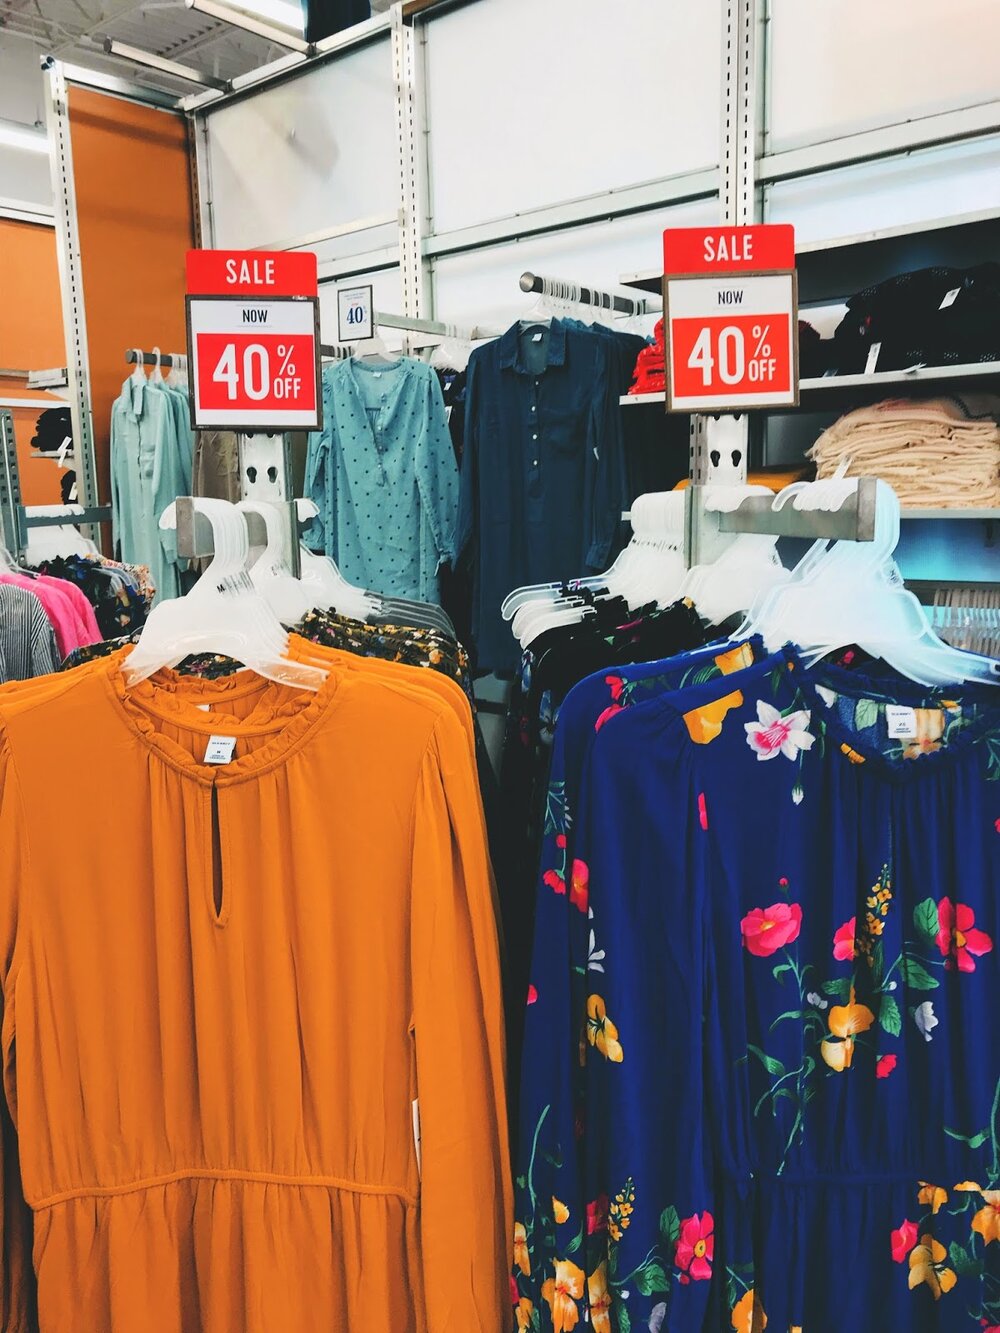 Shopping In City: Looking For Cute Summer Things + Why Are They Selling Long Sleeves?